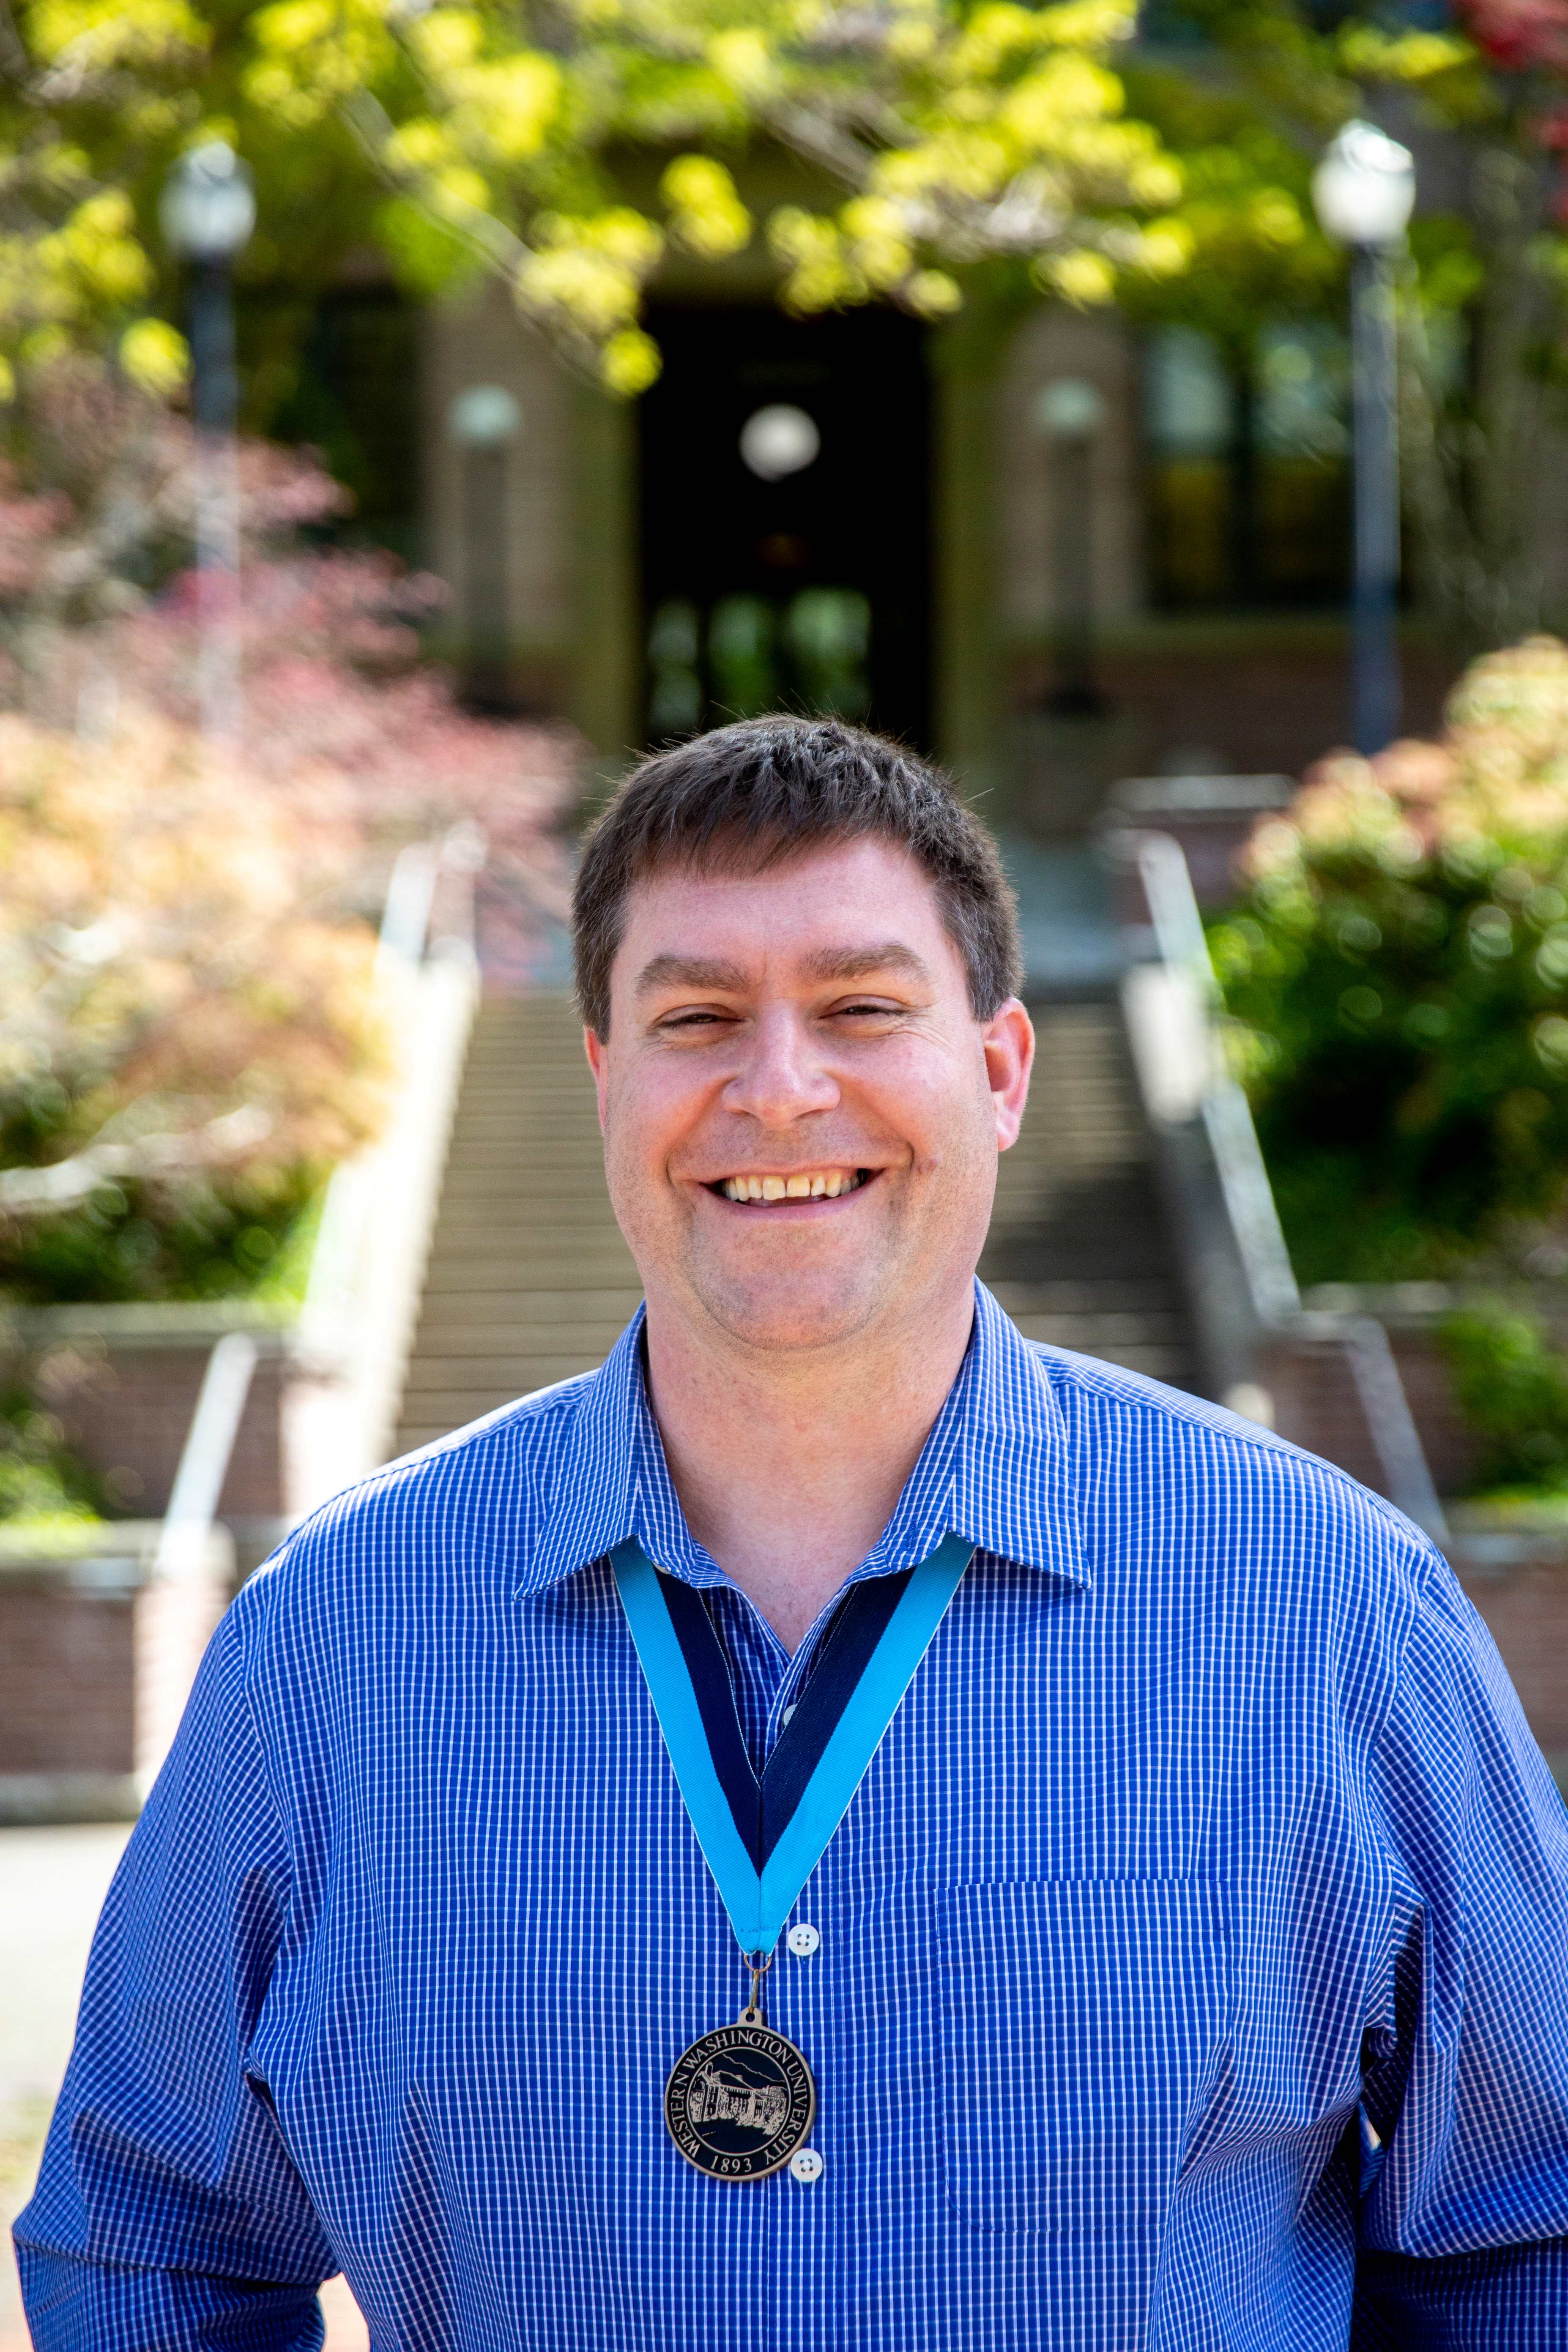 Ryan Cullup with a broad smile in front of Old Main wearing a vivid blue shirt and a WWU medallion on a neck ribbon 